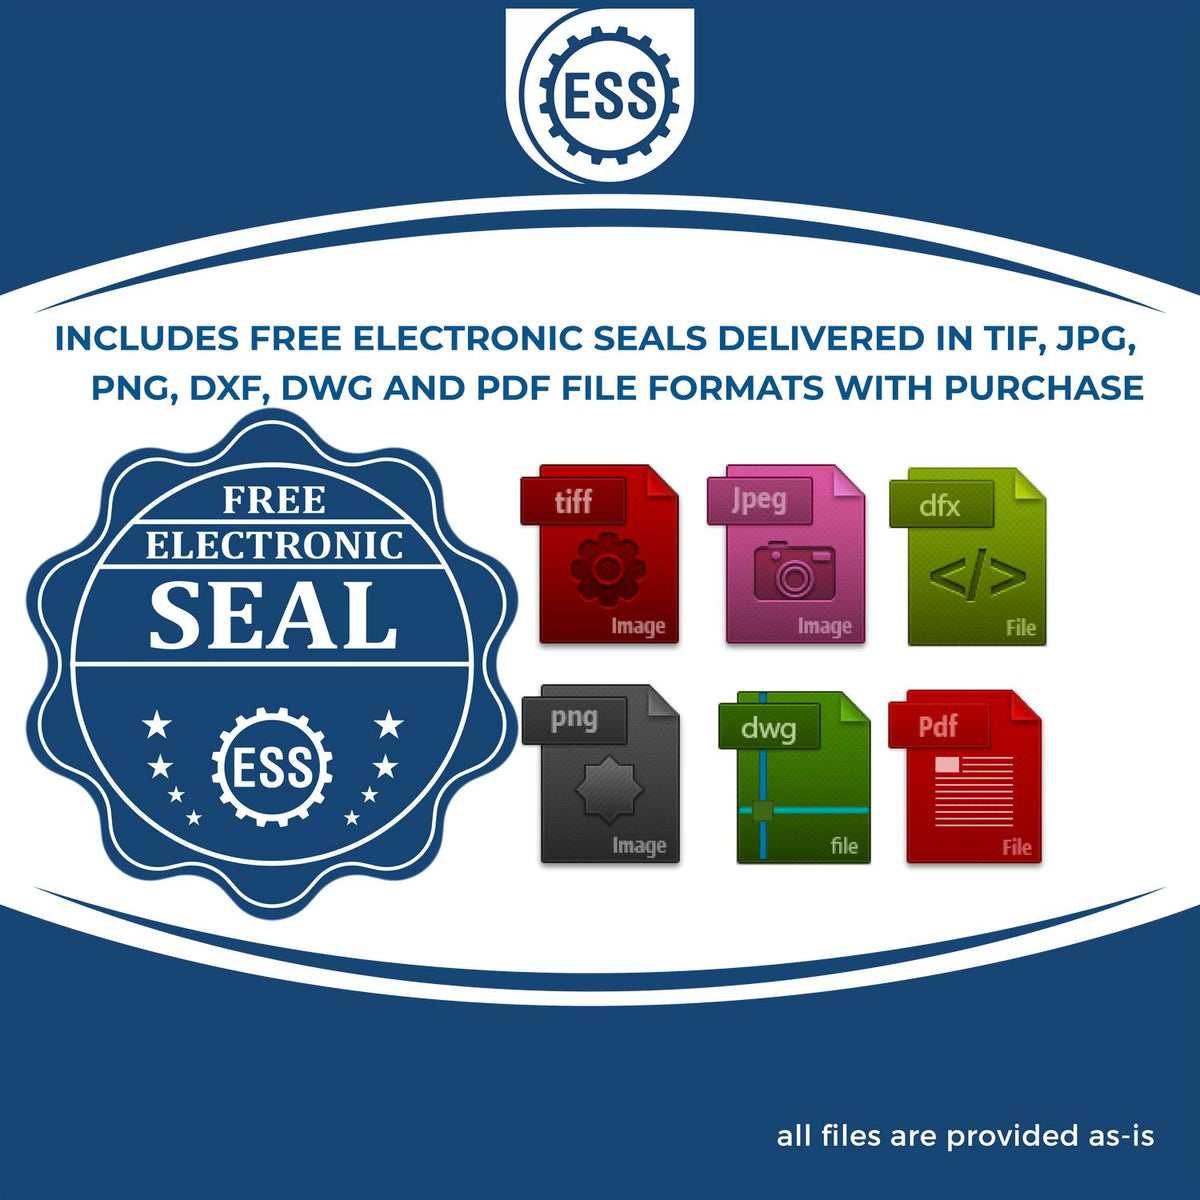 An infographic for the free electronic seal for the Self-Inking State Seal Alaska Notary Stamp illustrating the different file type icons such as DXF, DWG, TIF, JPG and PNG.